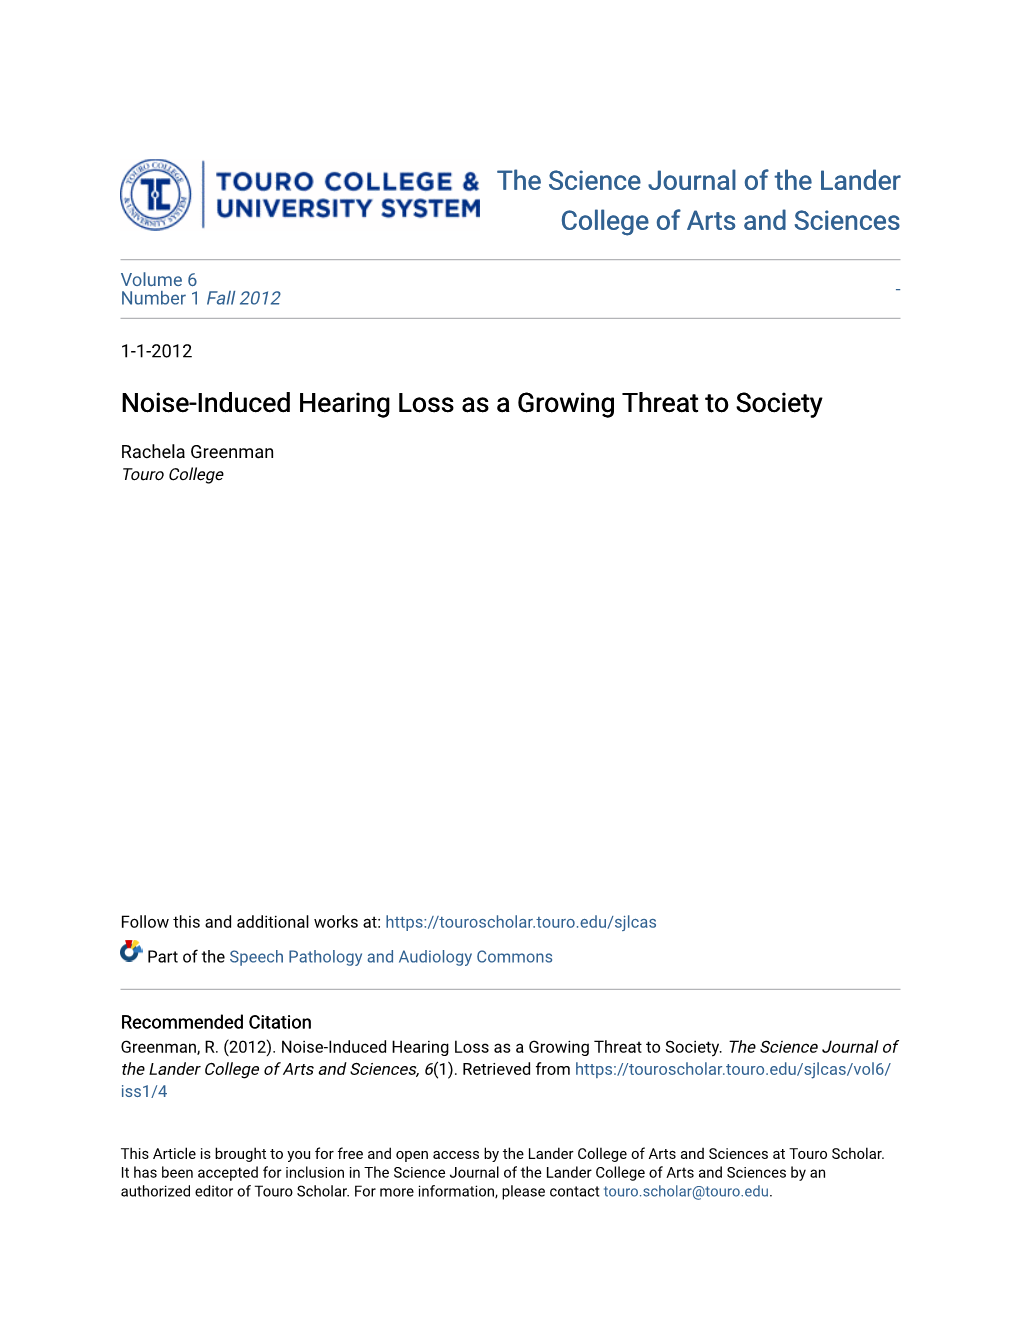 Noise-Induced Hearing Loss As a Growing Threat to Society